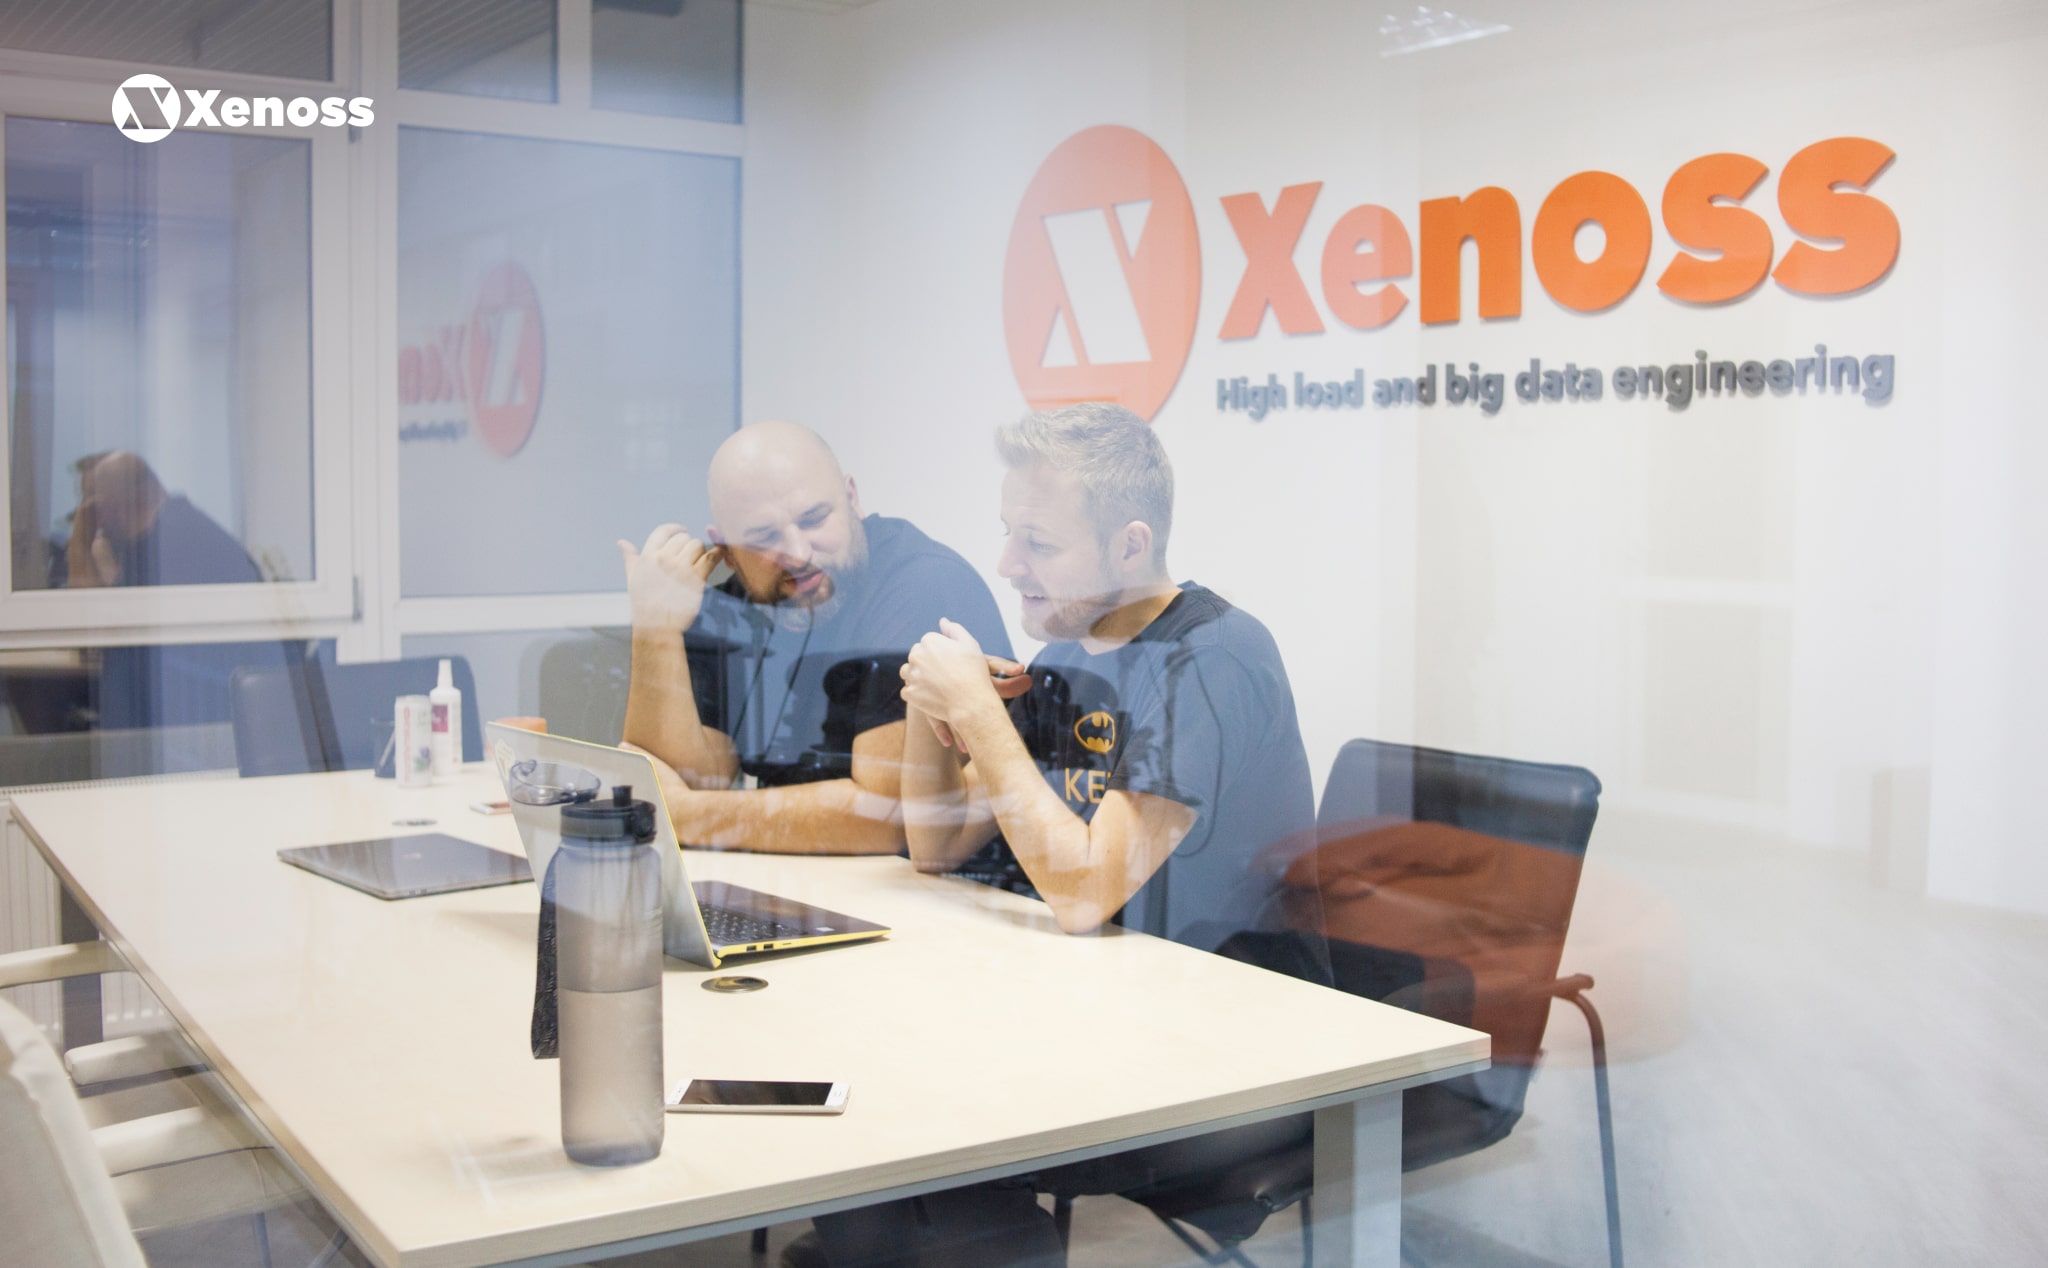 Xenoss Will Sponsor, Host and Speak at Software Architecture Fwdays 2021